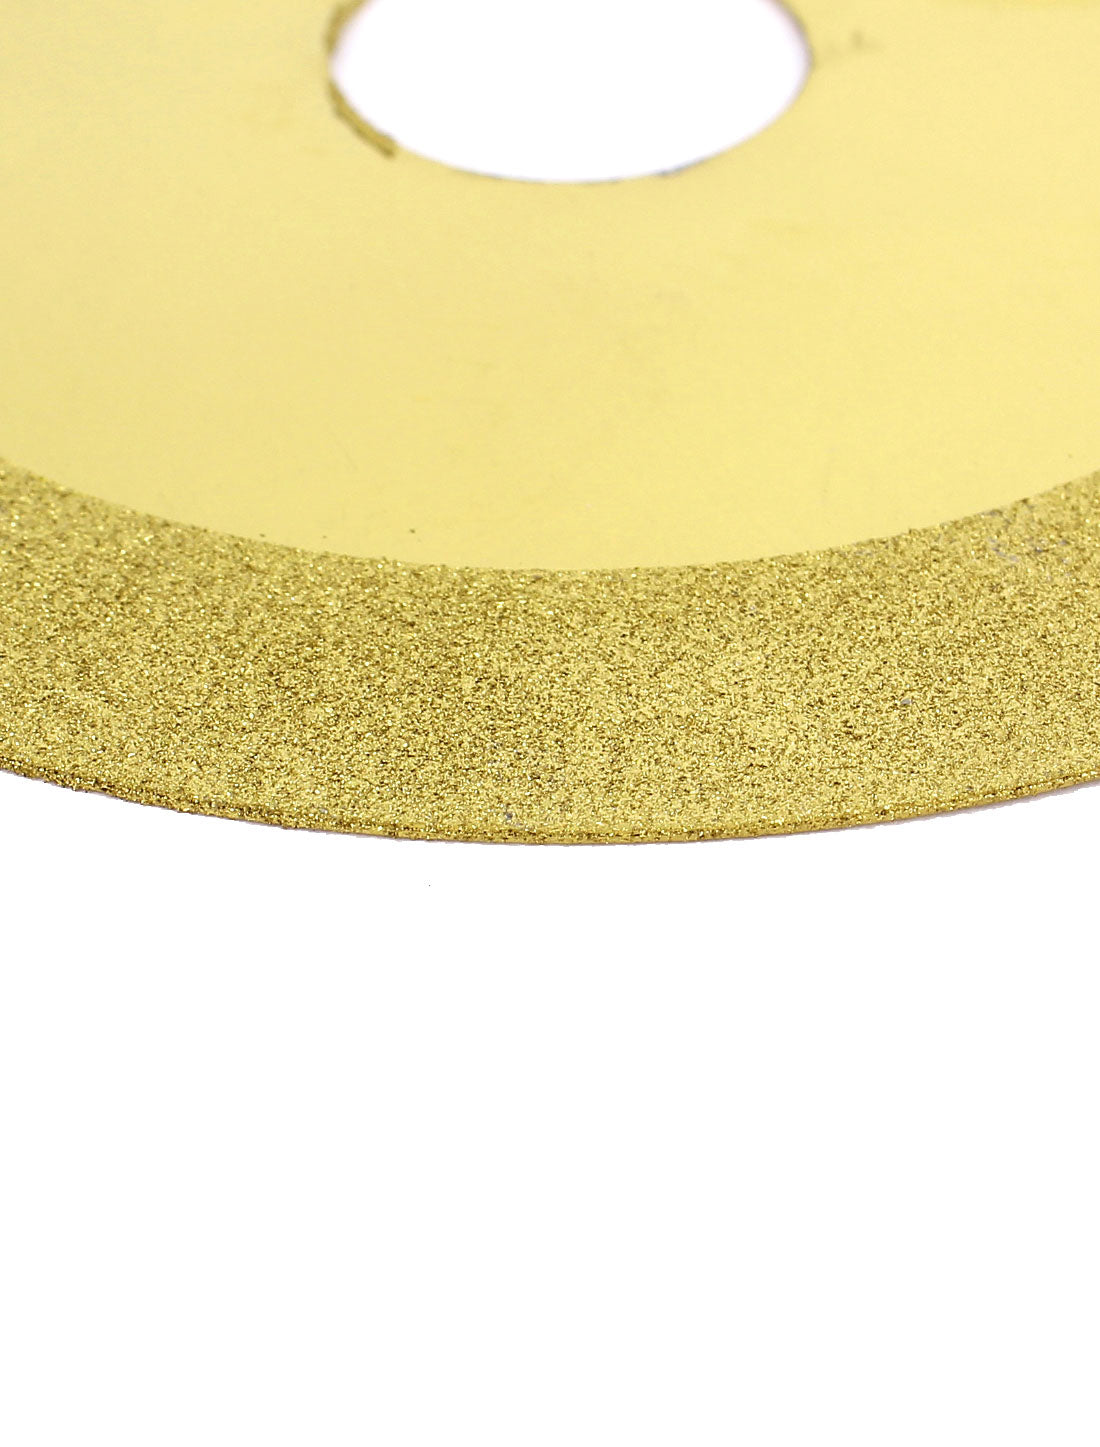 uxcell Uxcell 4" x 0.8" Glass Tile Diamond Coated Grinding Ceramic Cutting Wheel Disc Gold Tone